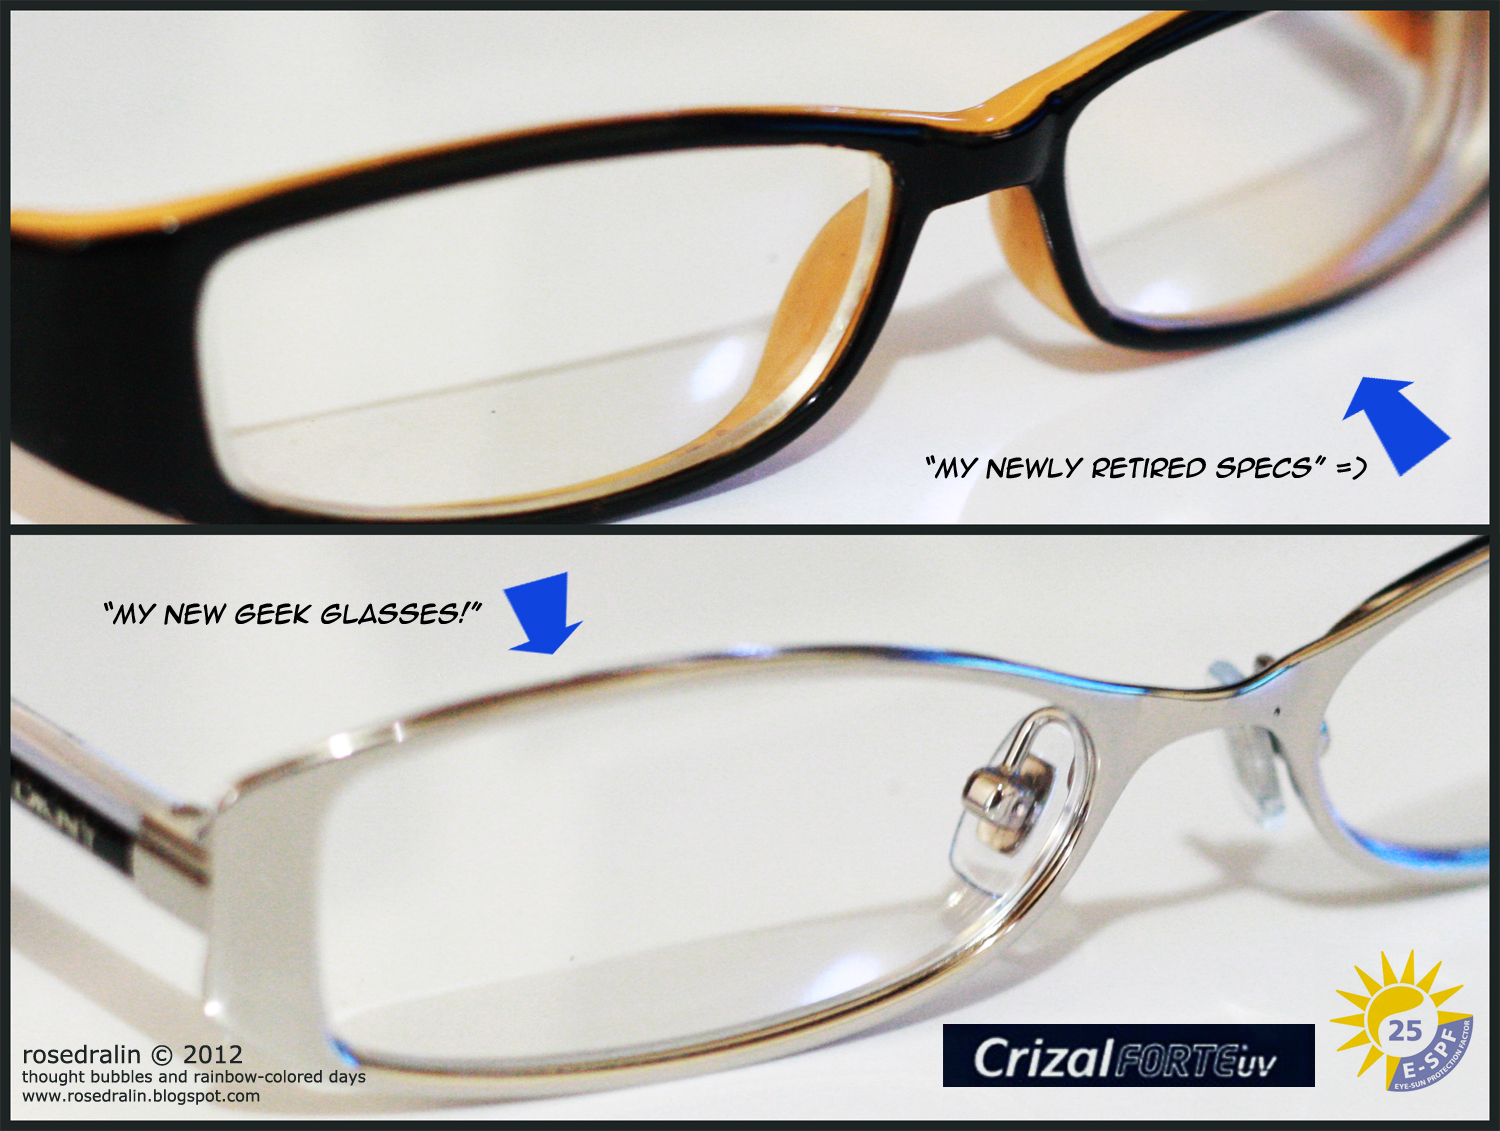 What do reviews say about Crizal lenses?